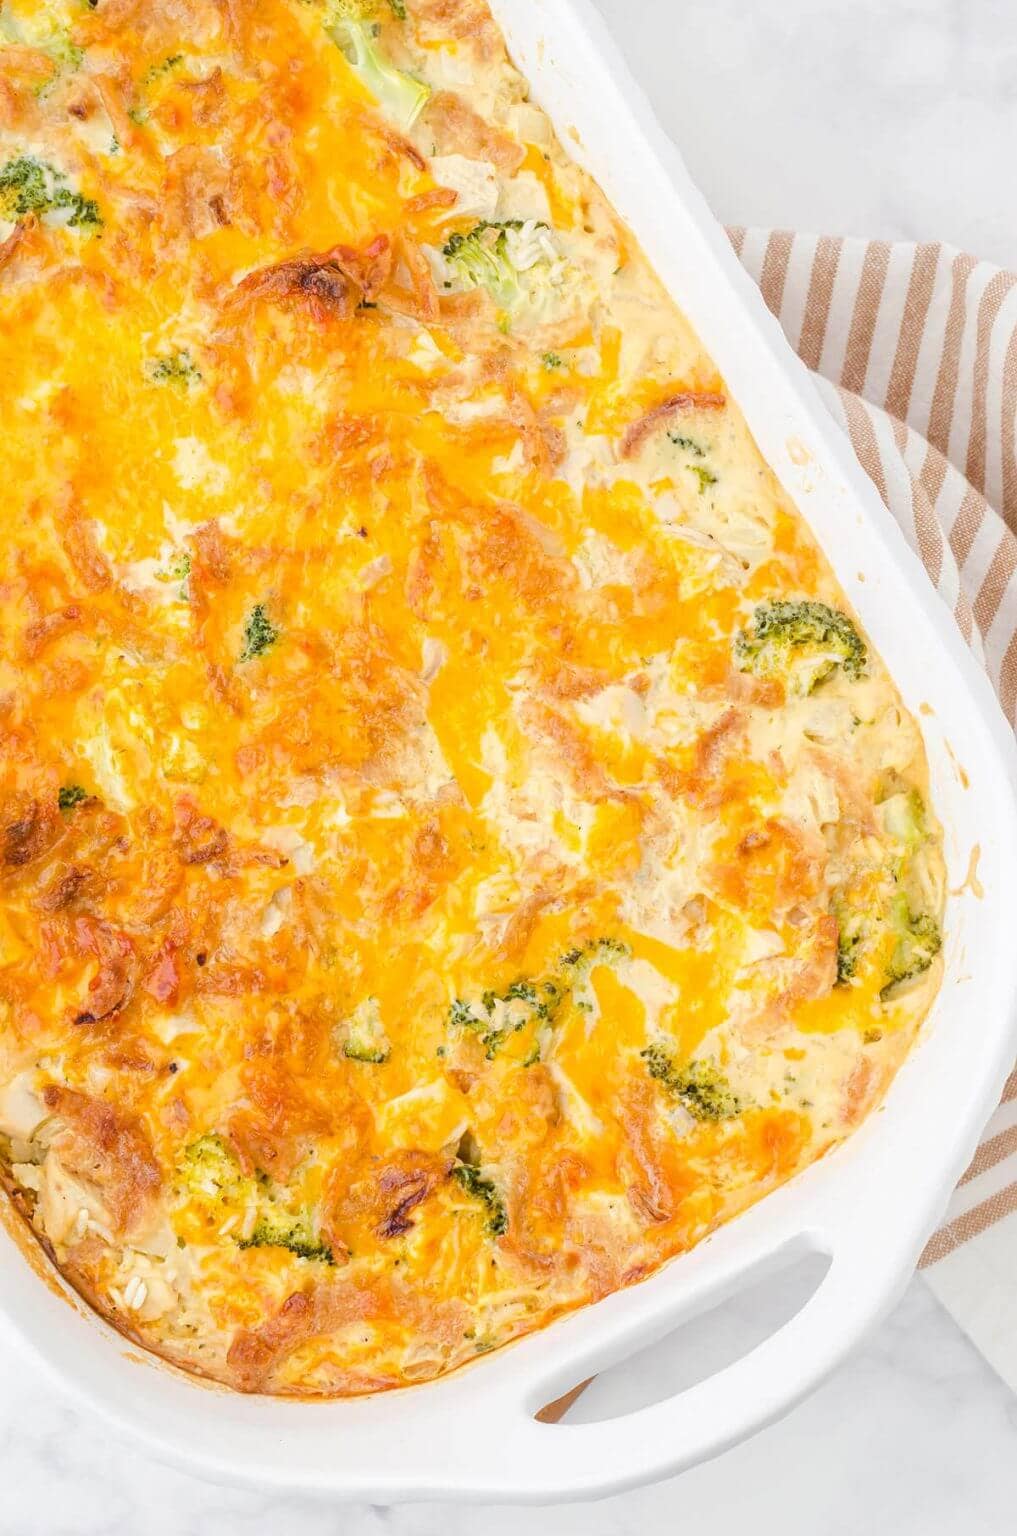 Chicken Broccoli Rice Casserole with Cheddar Cheese - Bowl Me Over